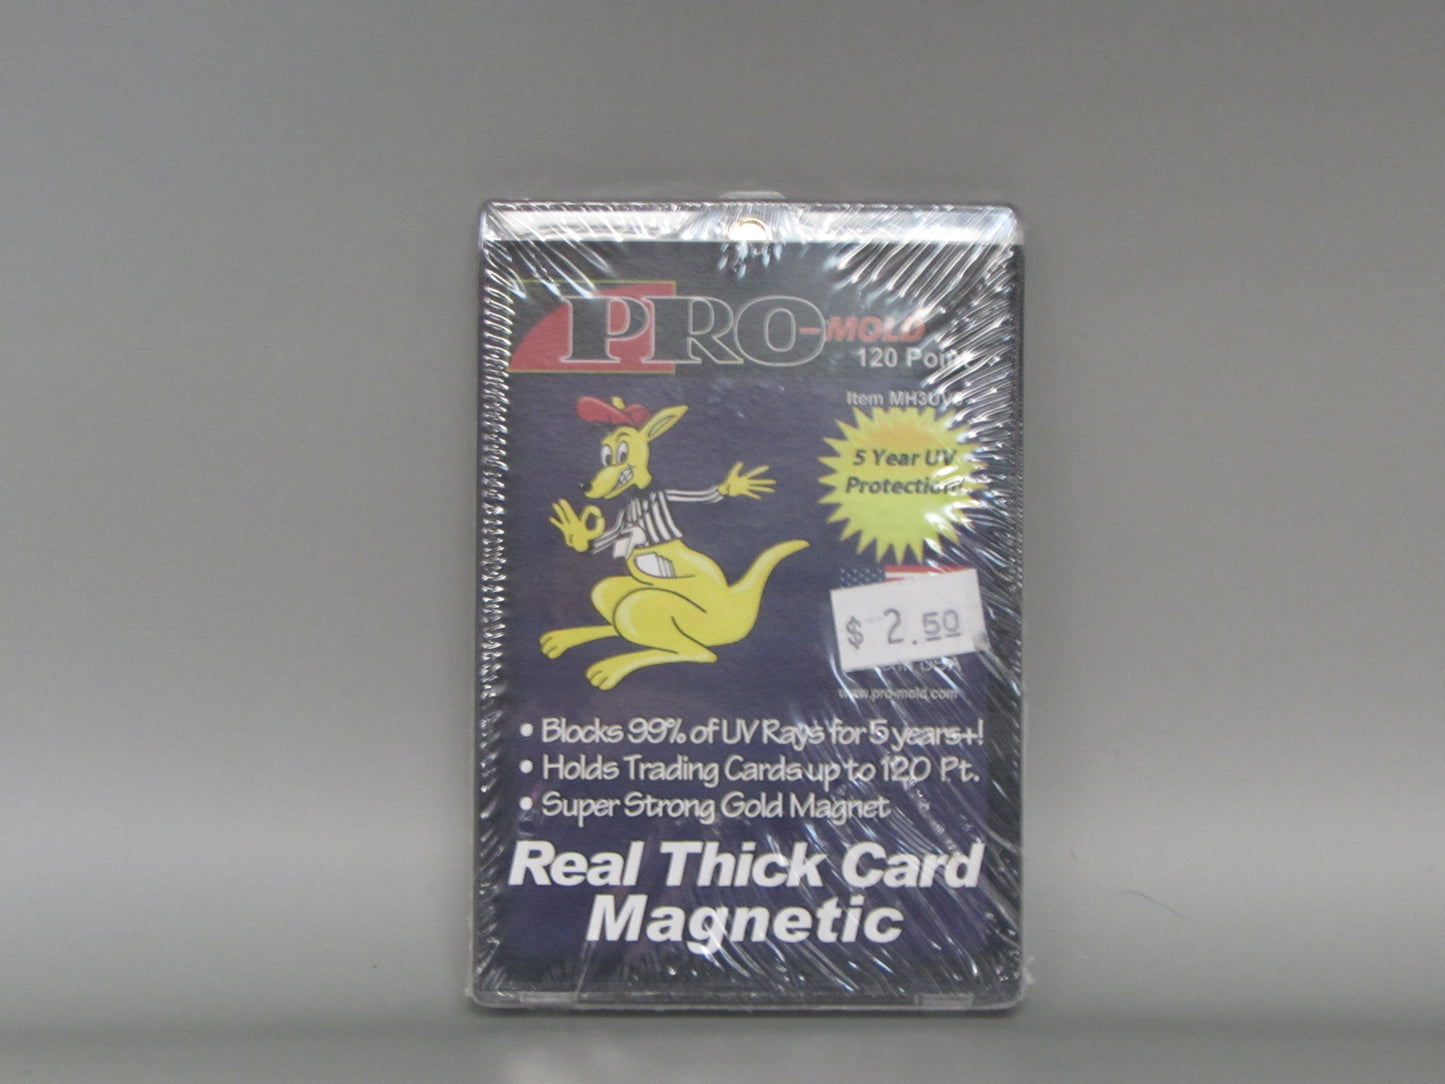 Pro mold 120pt real thick card magnetic